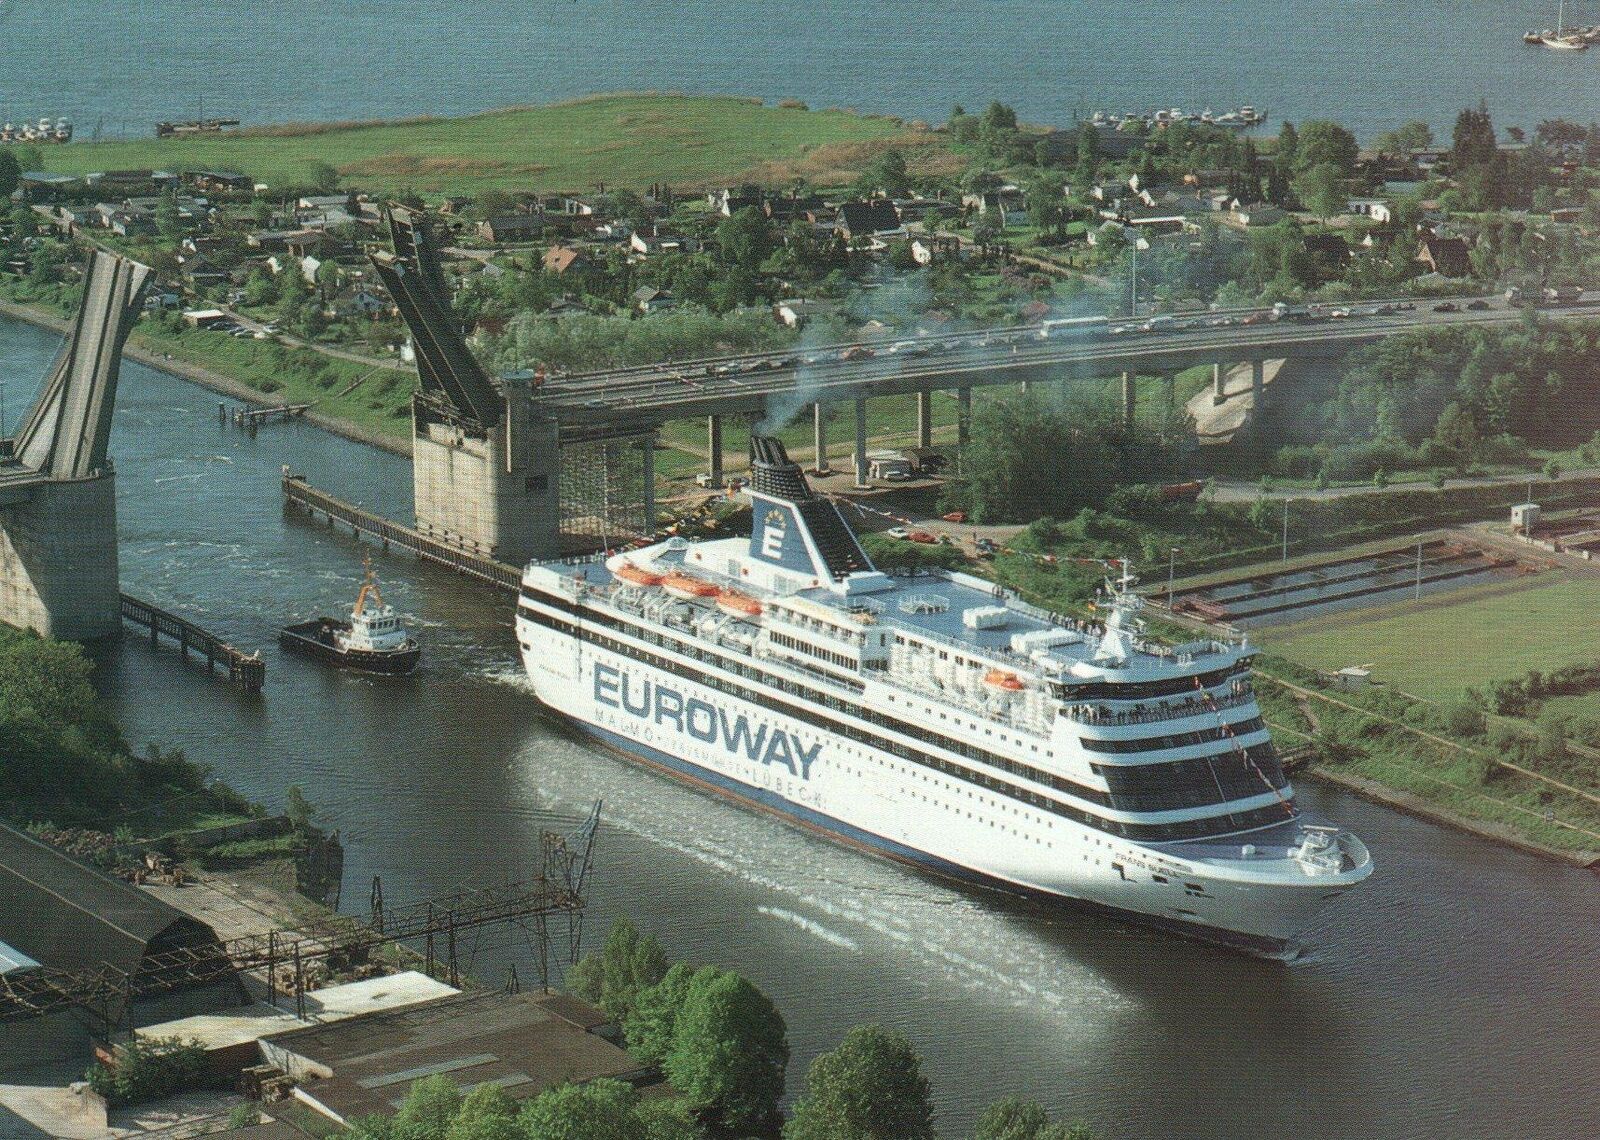 VINTAGE Euroway Ferry MS FRANS SUELL POSTCARD - UNUSED - NOT a Real Photo